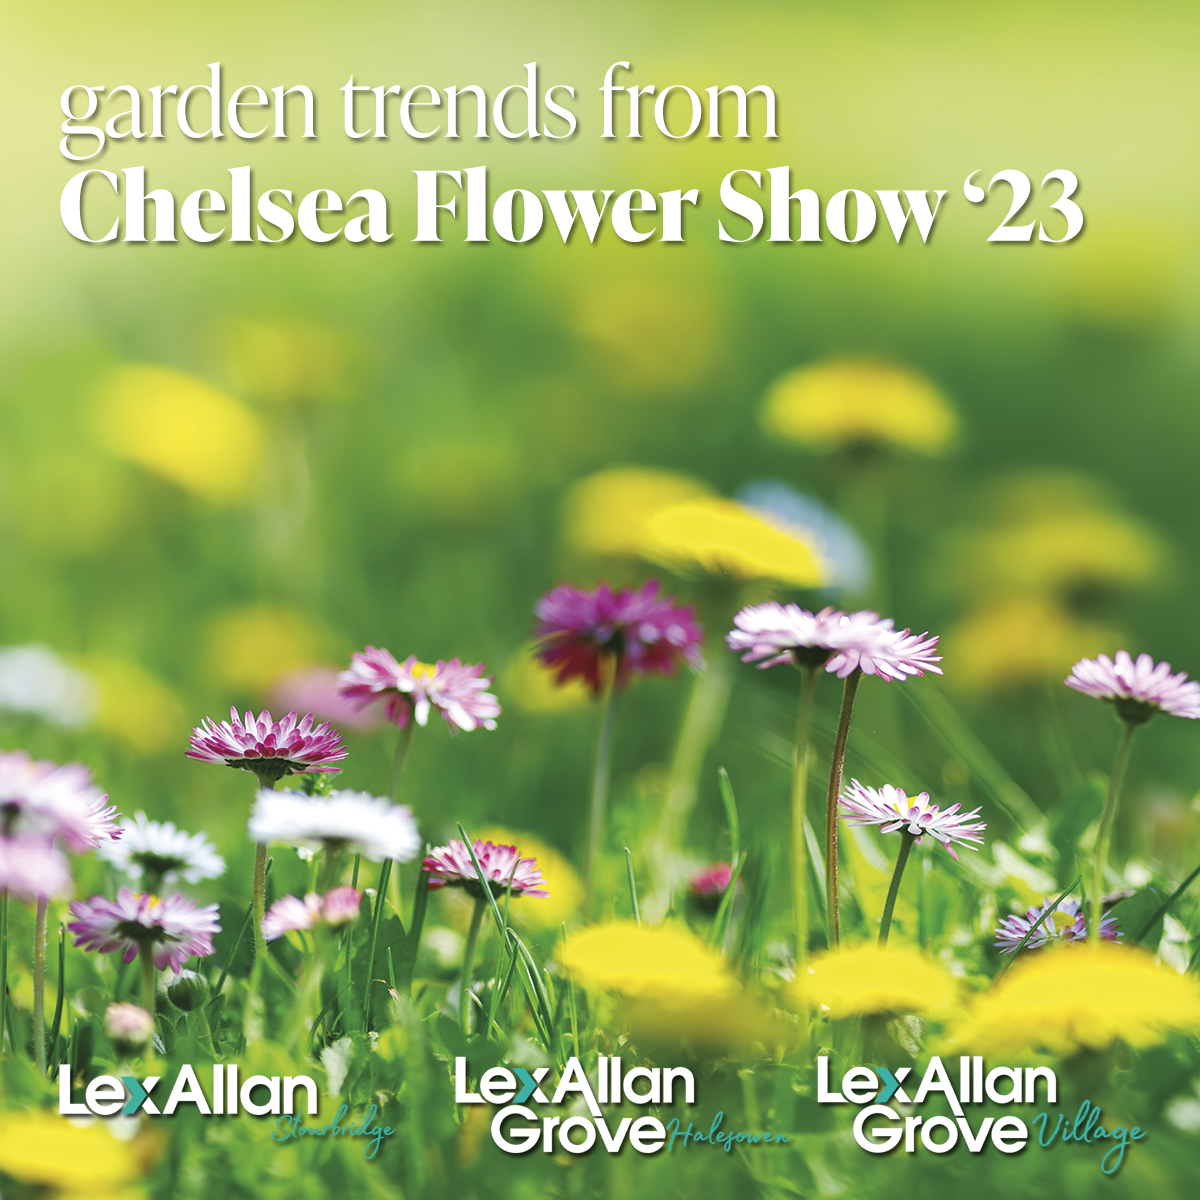 Gardening Trends from the Chelsea Flower Show that could help sell your home
No matter how large or small our outdoor space is, it's always been an important facet when selling a property
#EstateAgents #ExceedingExpectations #Hagley #Halesowen #Stourbridge
lexallan.co.uk/success-storie…